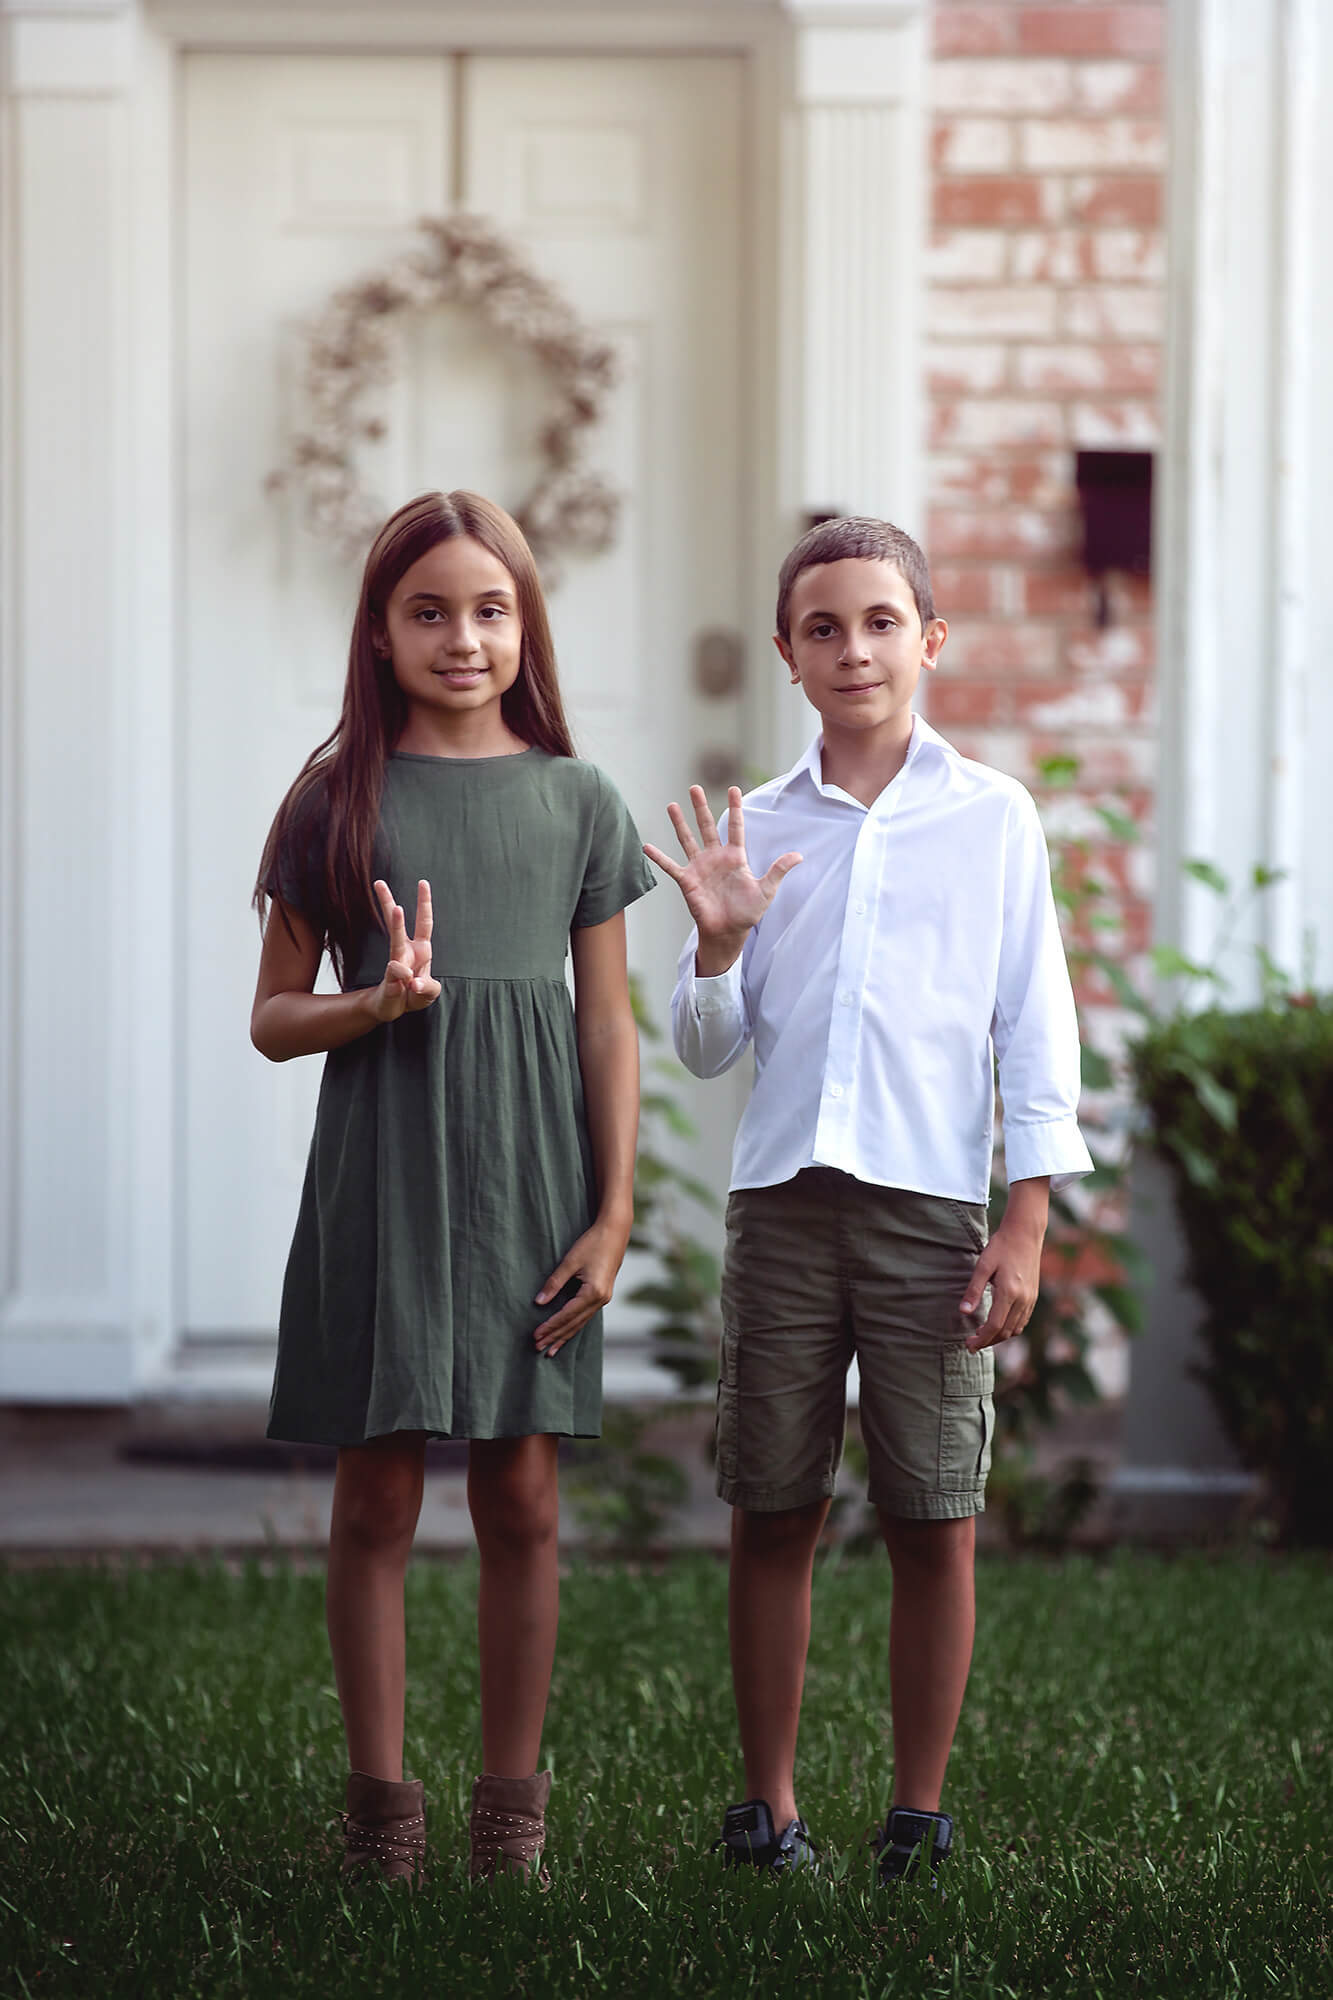 Siblings showing their grades on their first day of school in Houston.